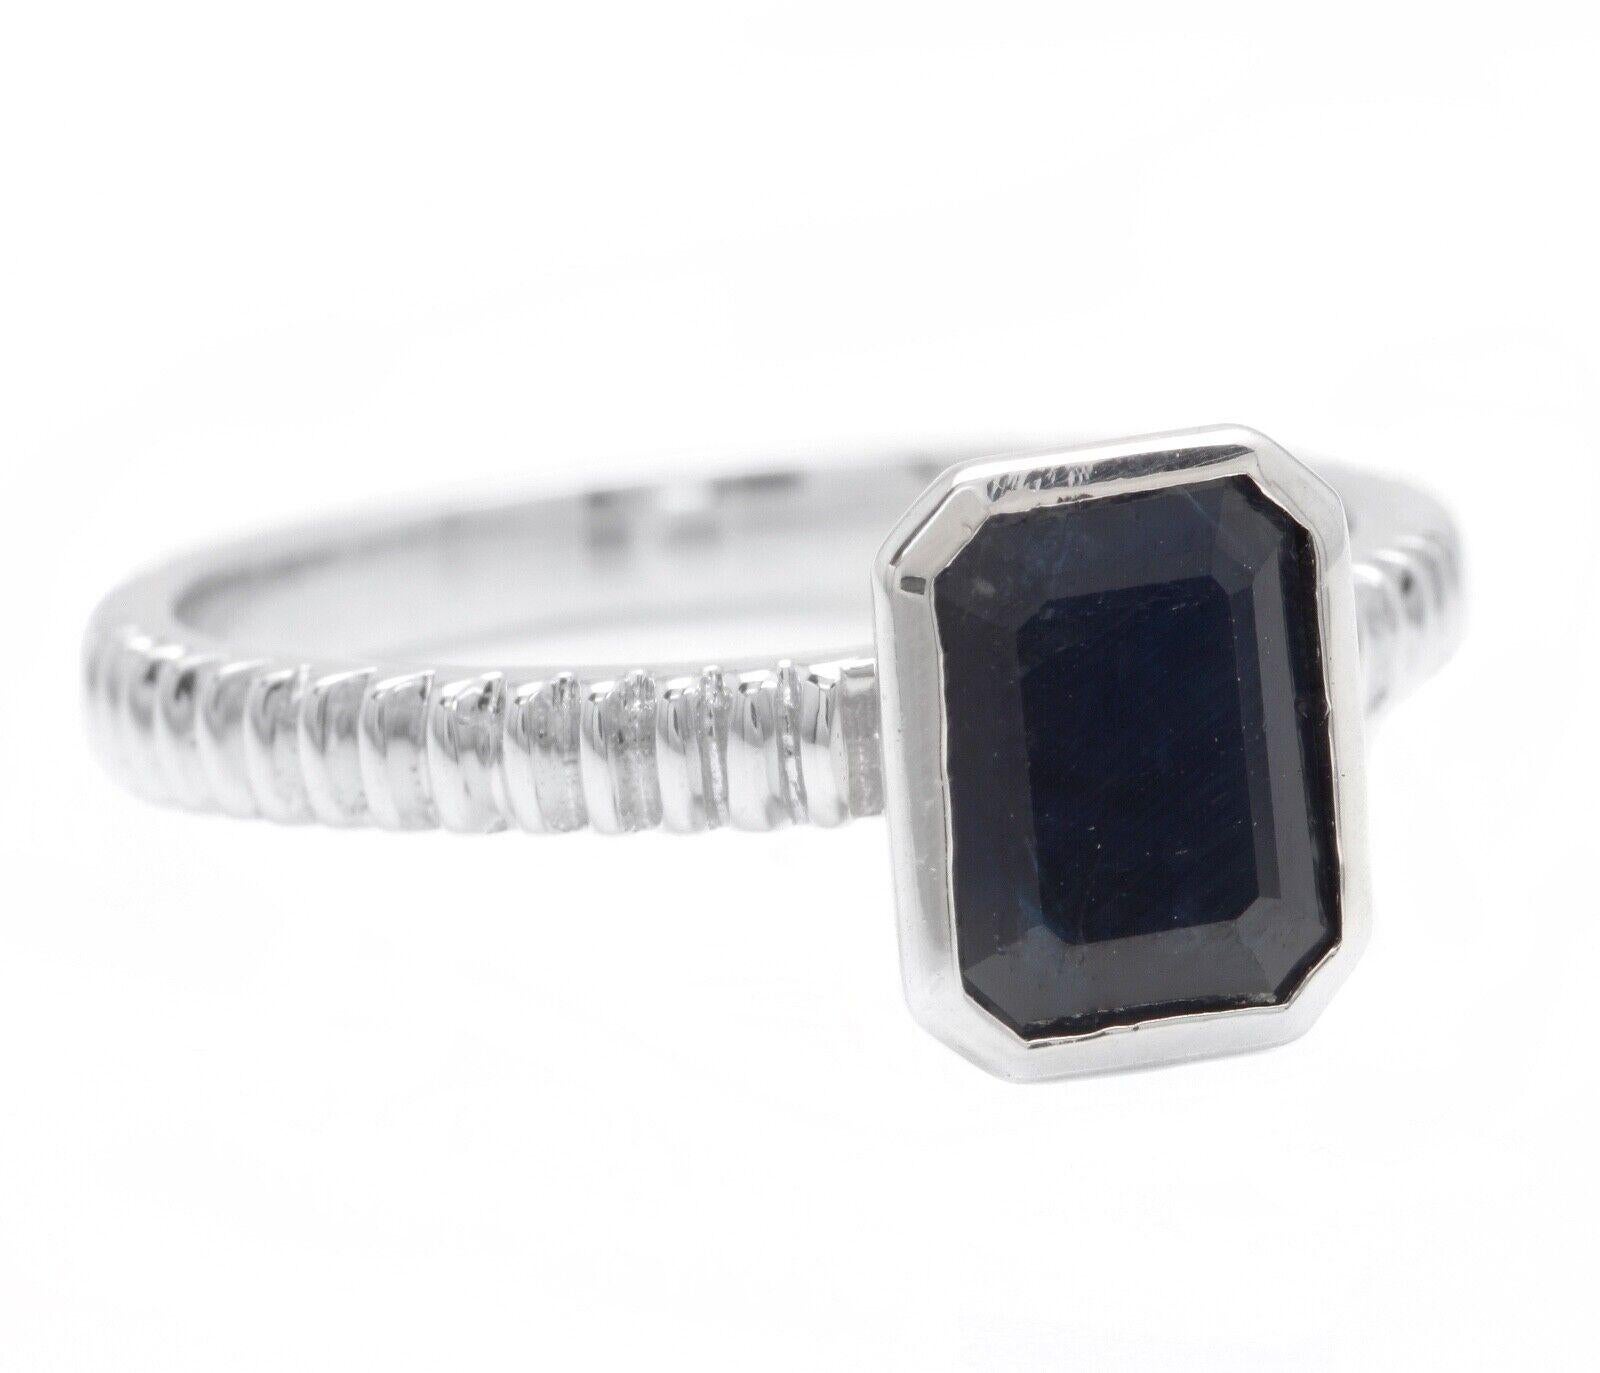 1.50Ct Exquisite Natural Blue Sapphire 14K Solid White Gold Ring

Total Natural Baguette Cut Sapphire Weights: Approx. 1.50 Carats (Heated)

Sapphire Measures: 8.50 x 6.50 mm

Ring size: 7 (free re-sizing available)

Ring total weight: Approx. 3.6